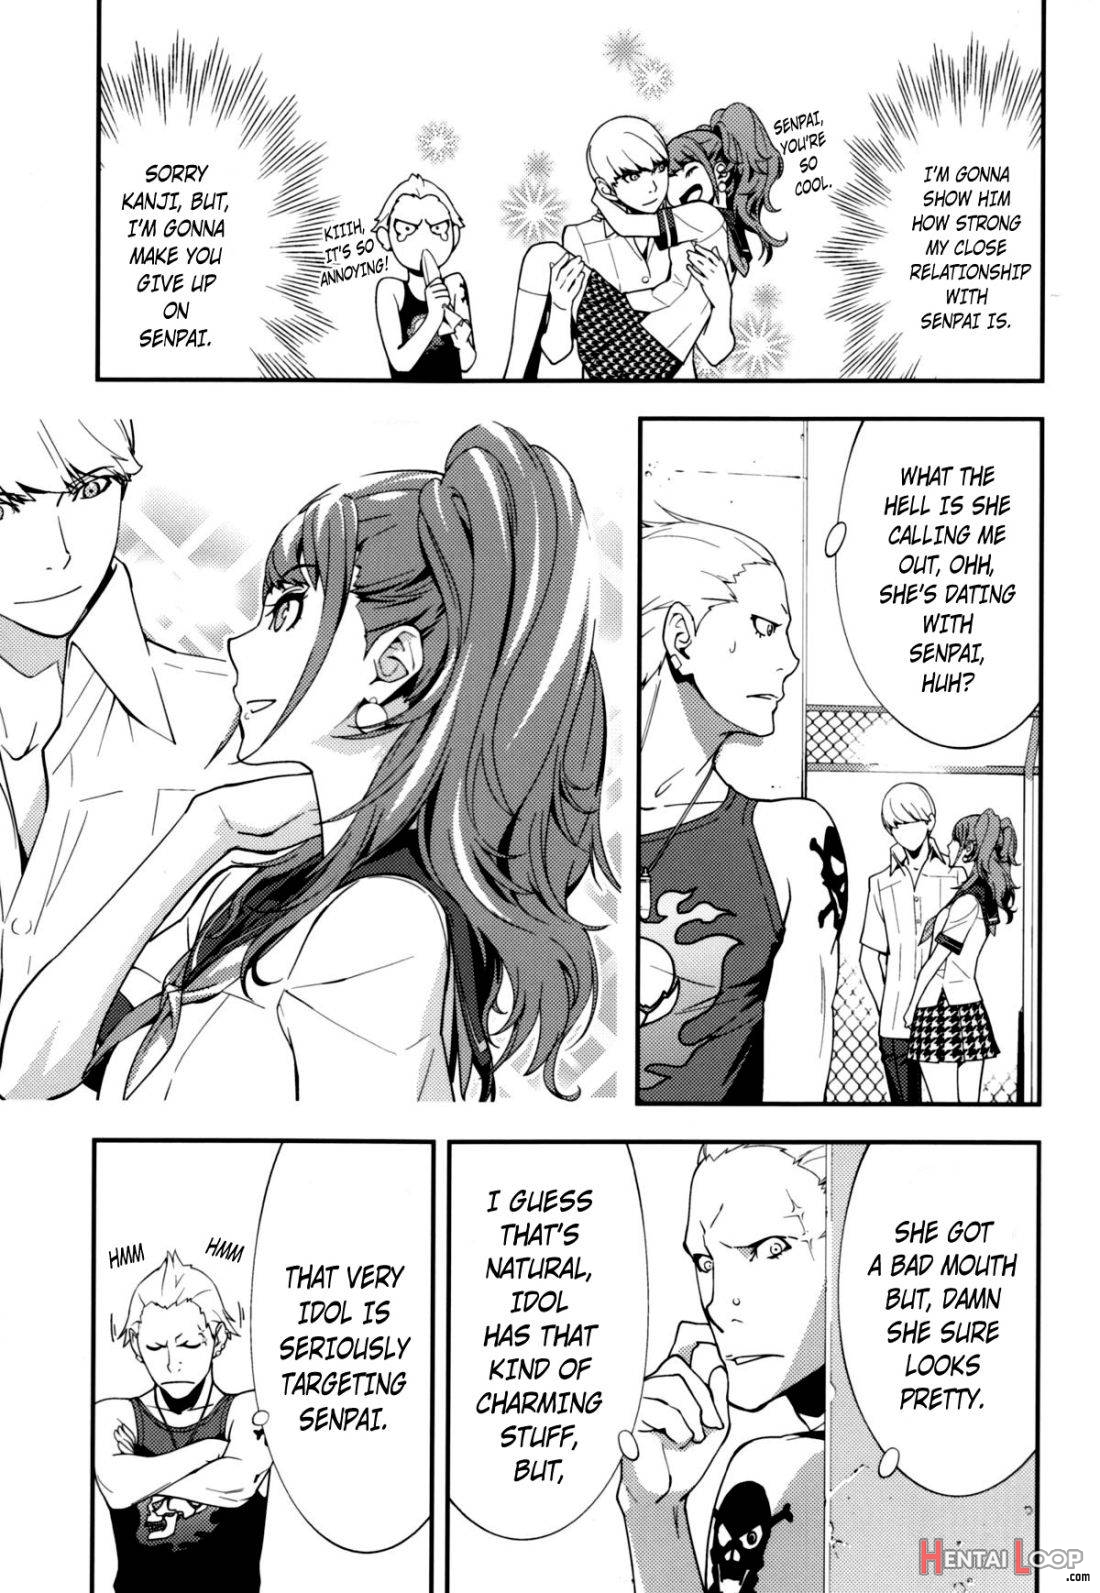 Rise Sexualis 2 page 6